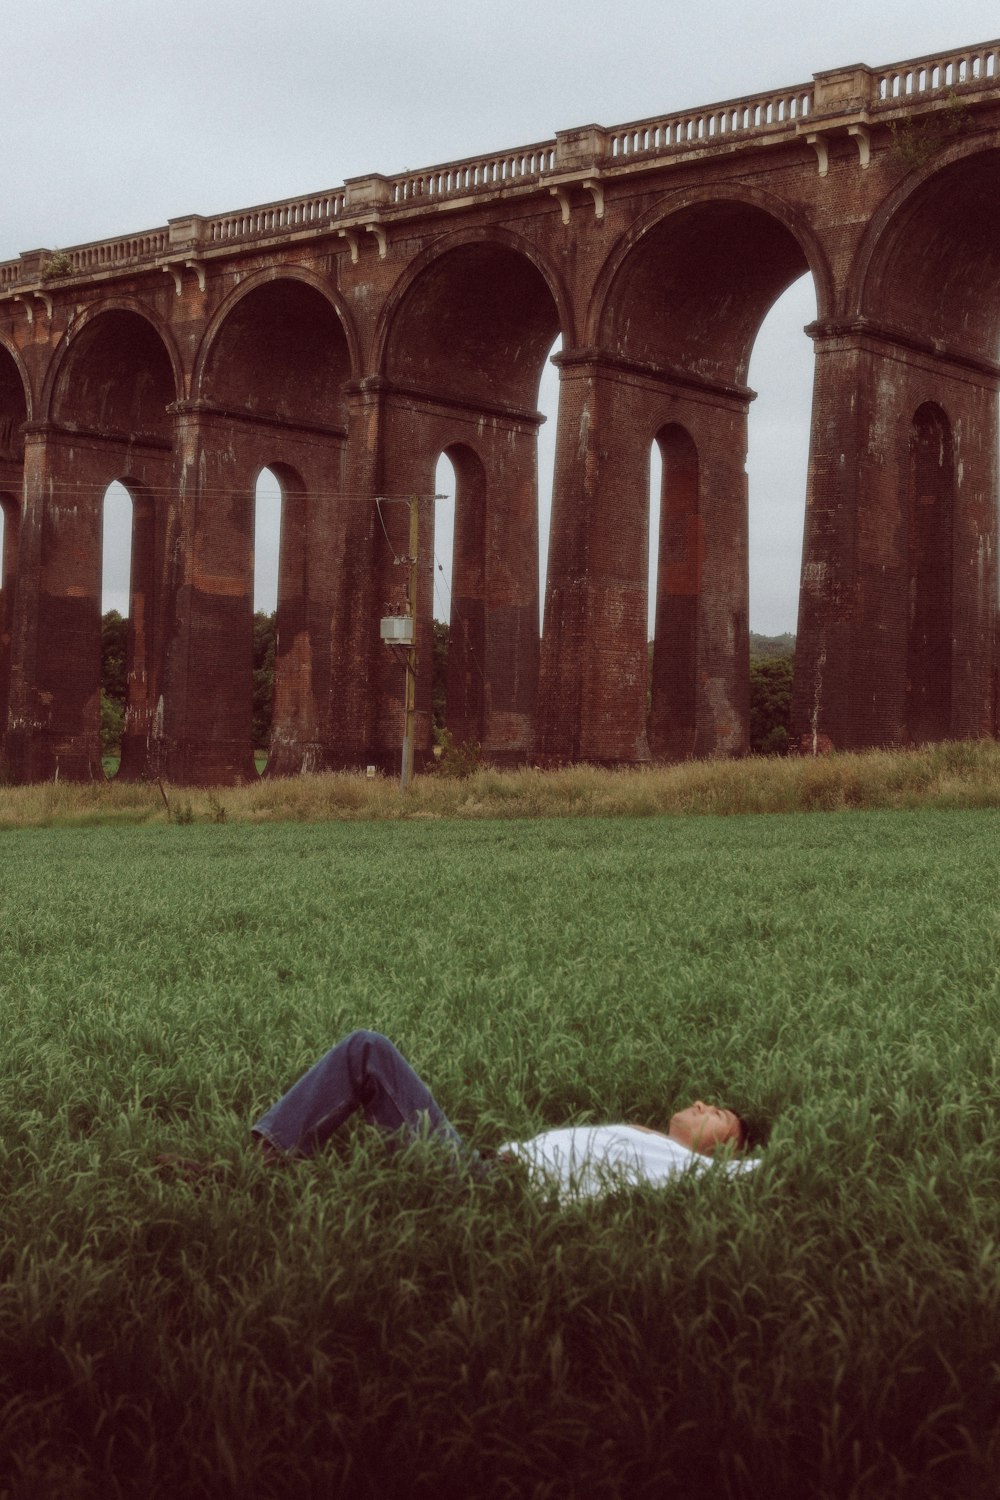 a person lying in the grass in front of a large brick building